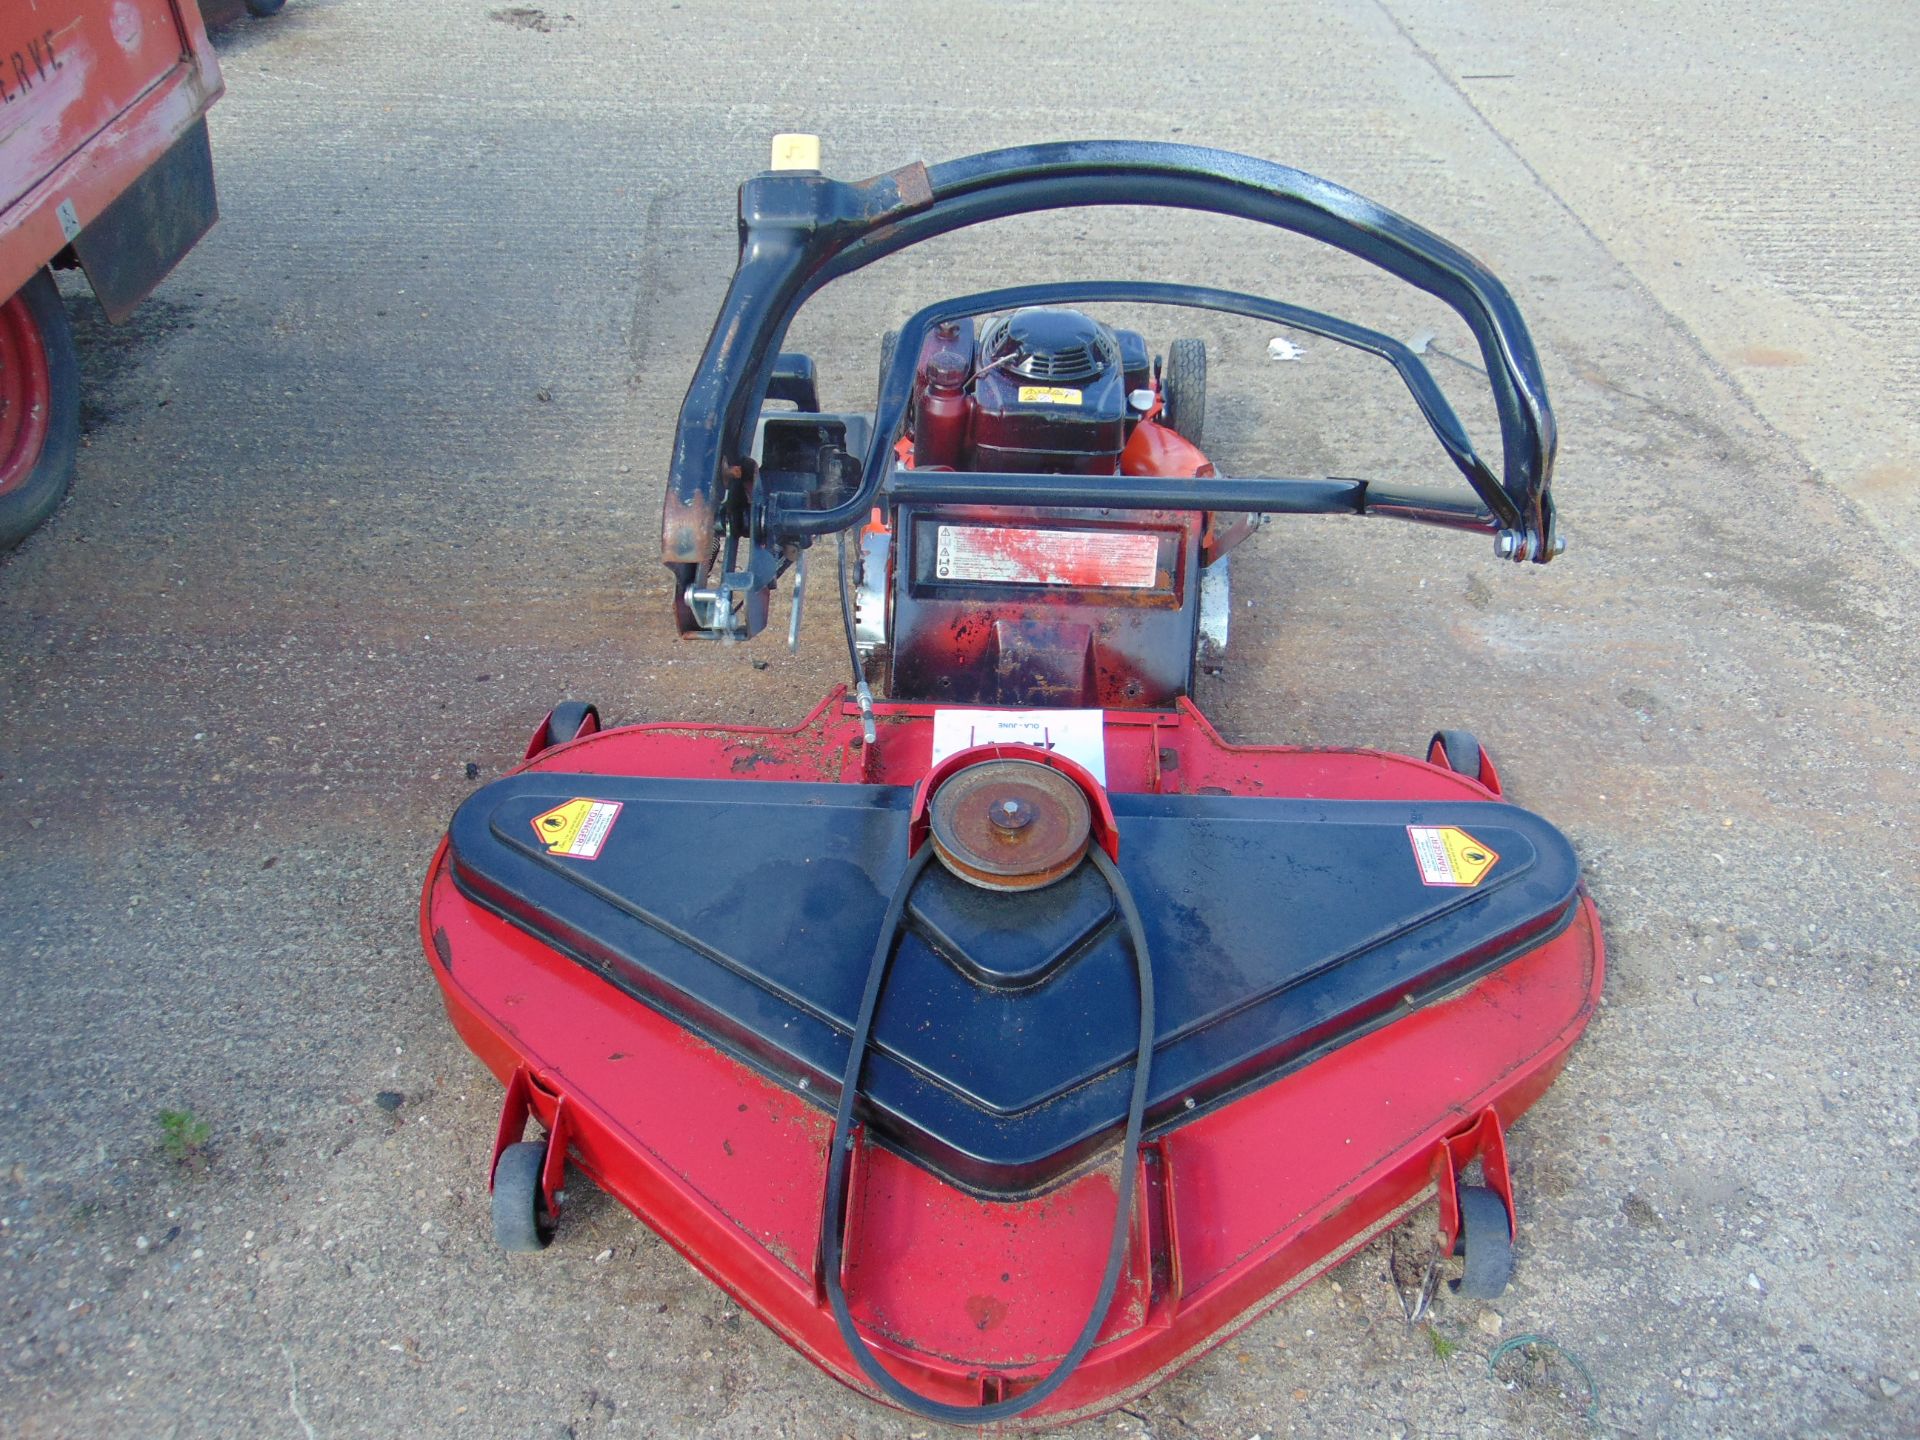 KUBOTA MOWER PLUS COUNTAX 48 INCHES MOWER DECK FROM COUNTY COUNCIL - Image 5 of 6